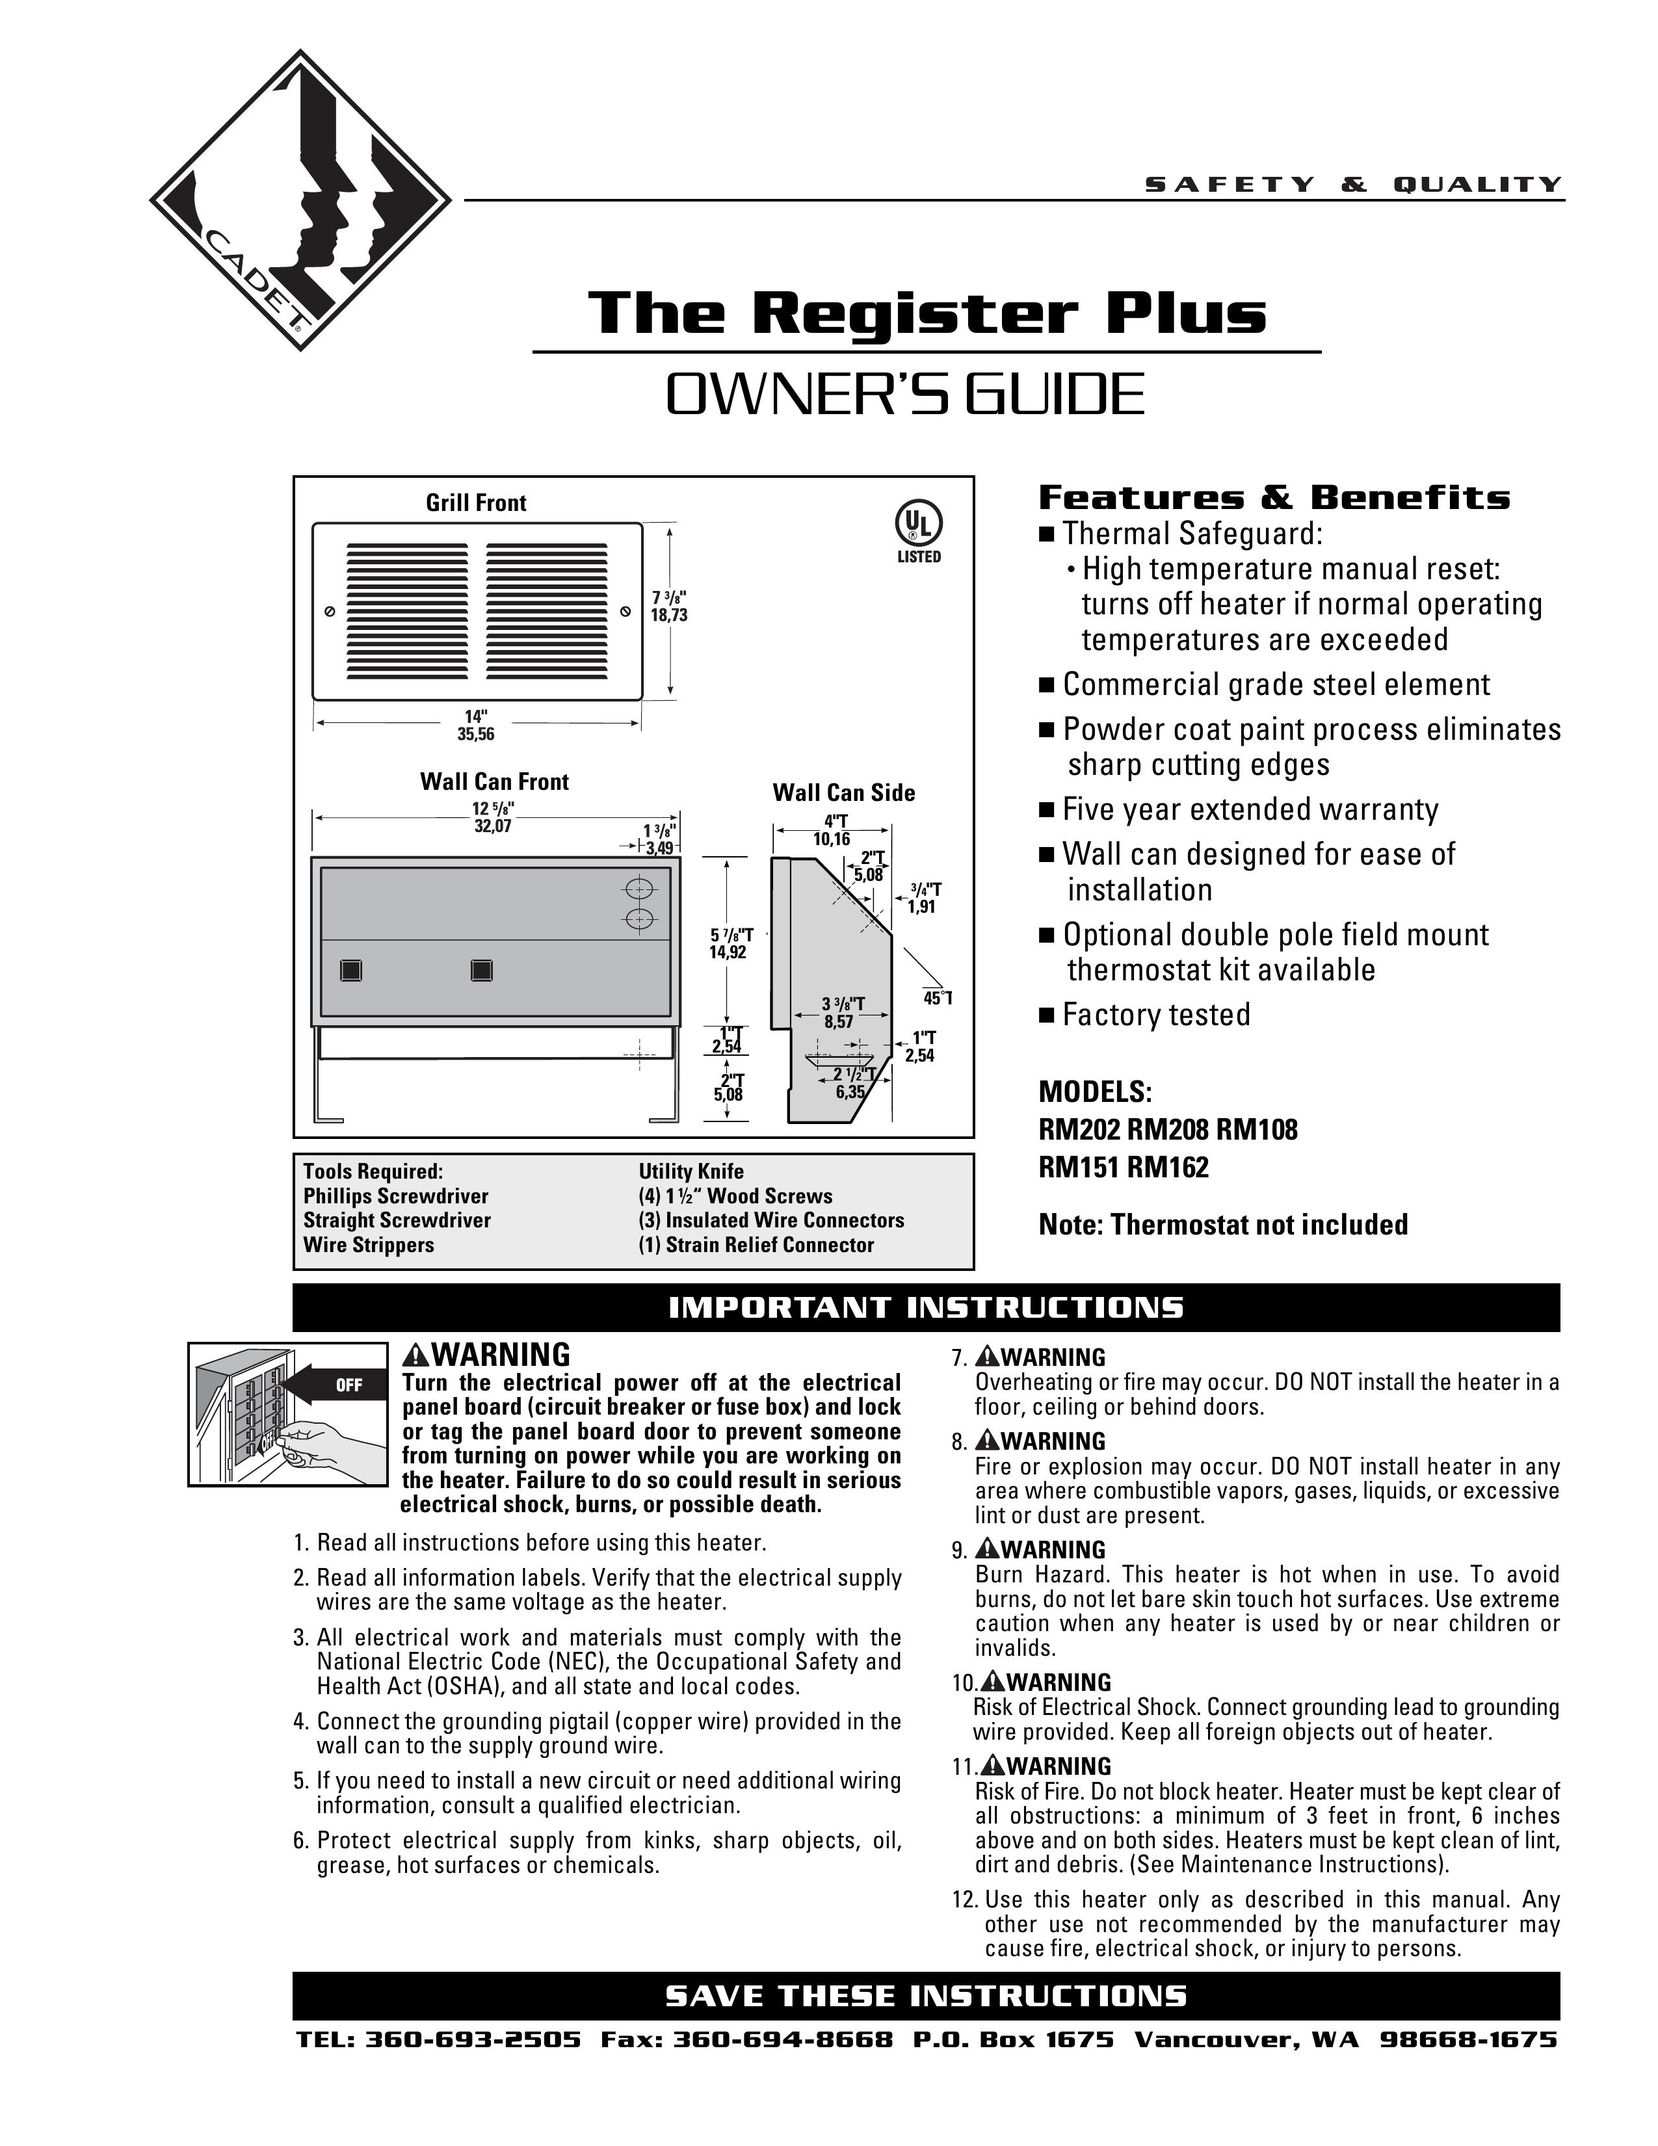 Cadet RM202 Electric Heater User Manual